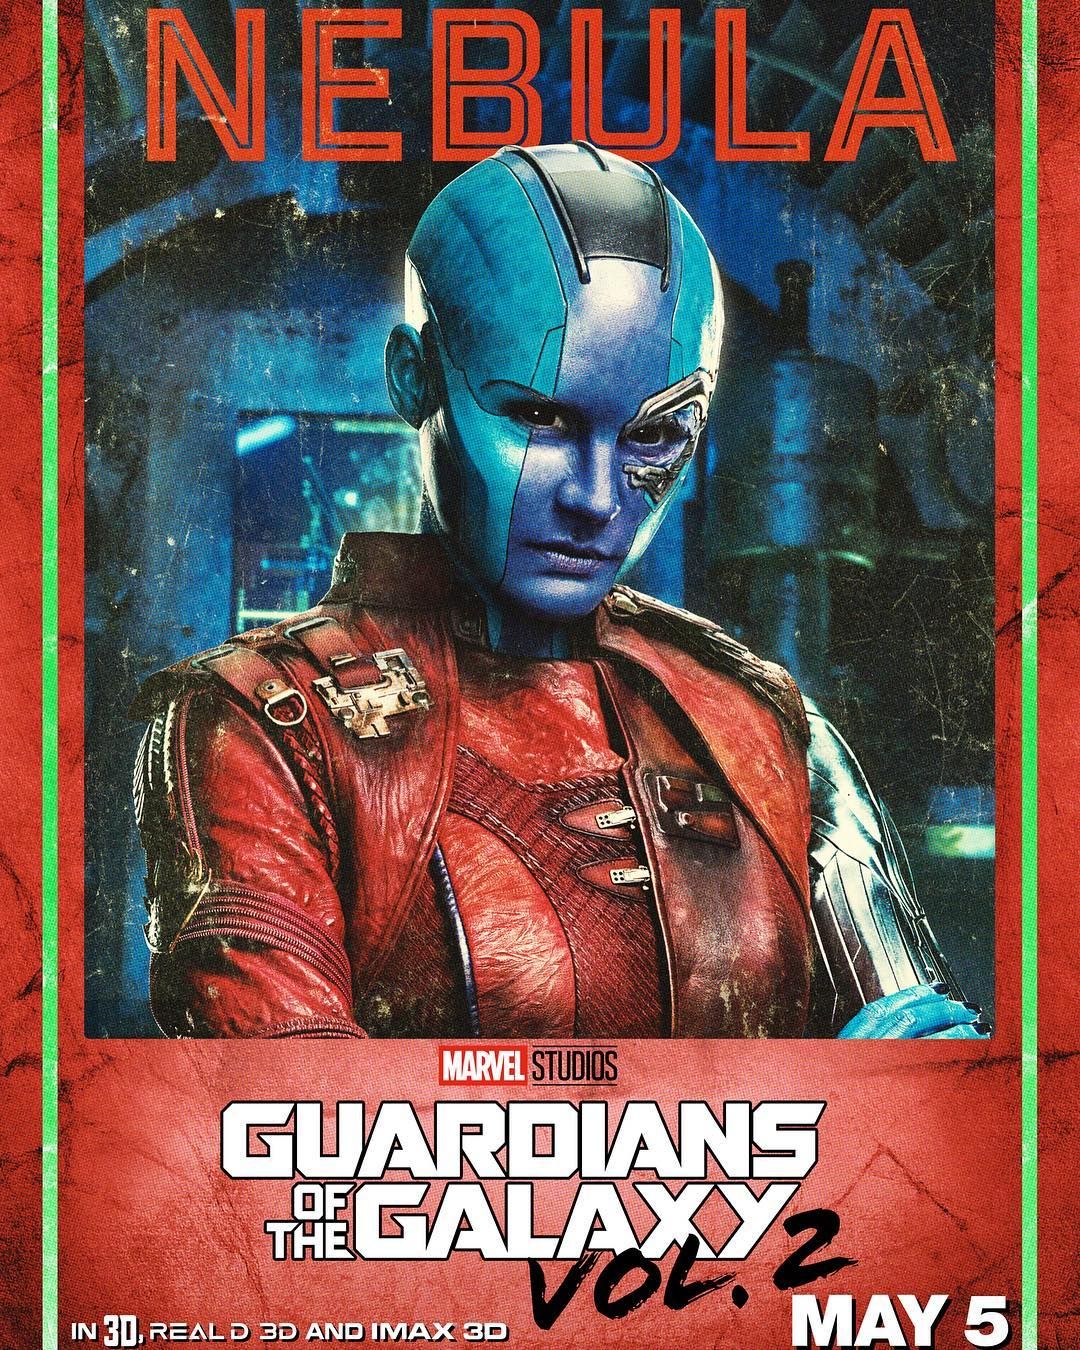 Guardians of the Galaxy Vol 2 Character Poster for Nebula